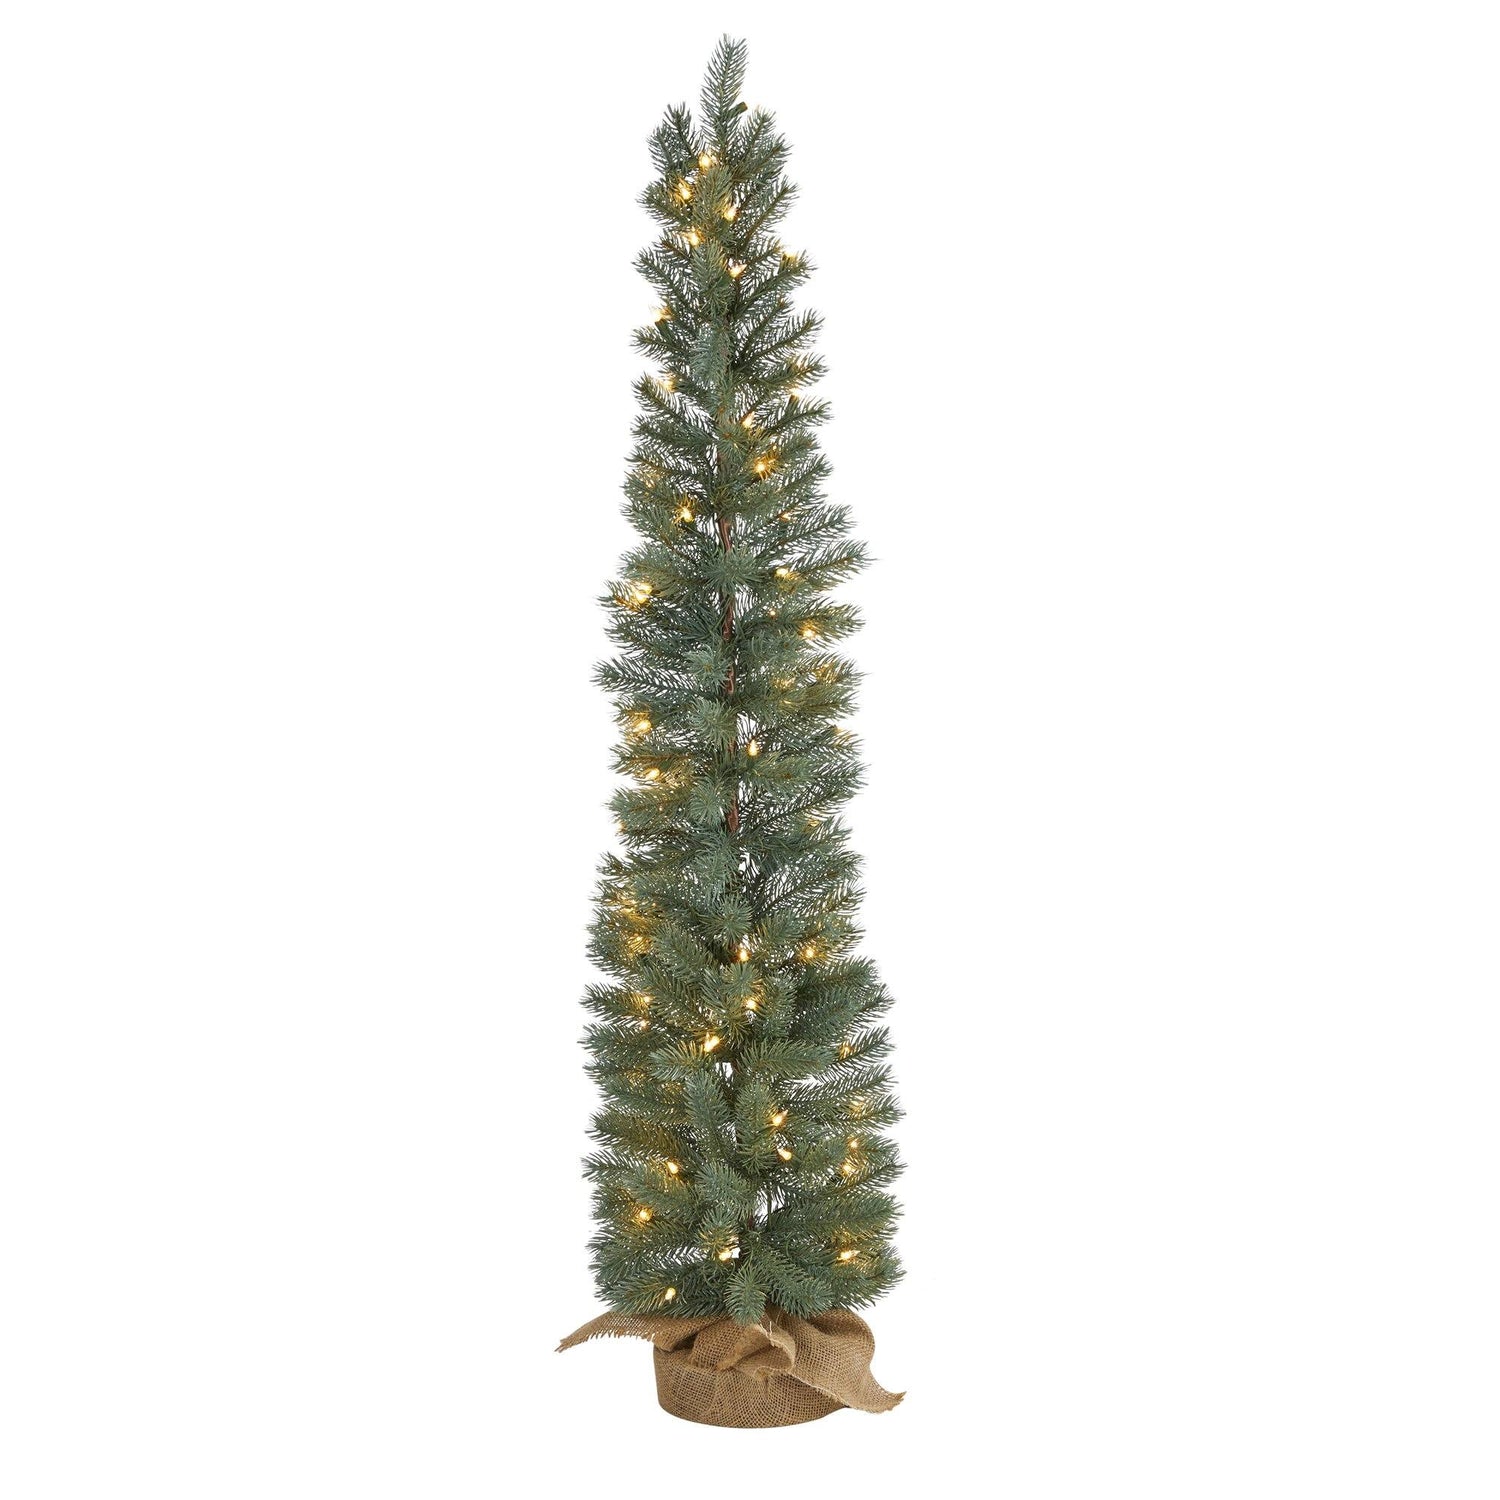 4’ Green Pine Artificial Christmas Tree with 70 Warm White Lights Set in a Burlap Base